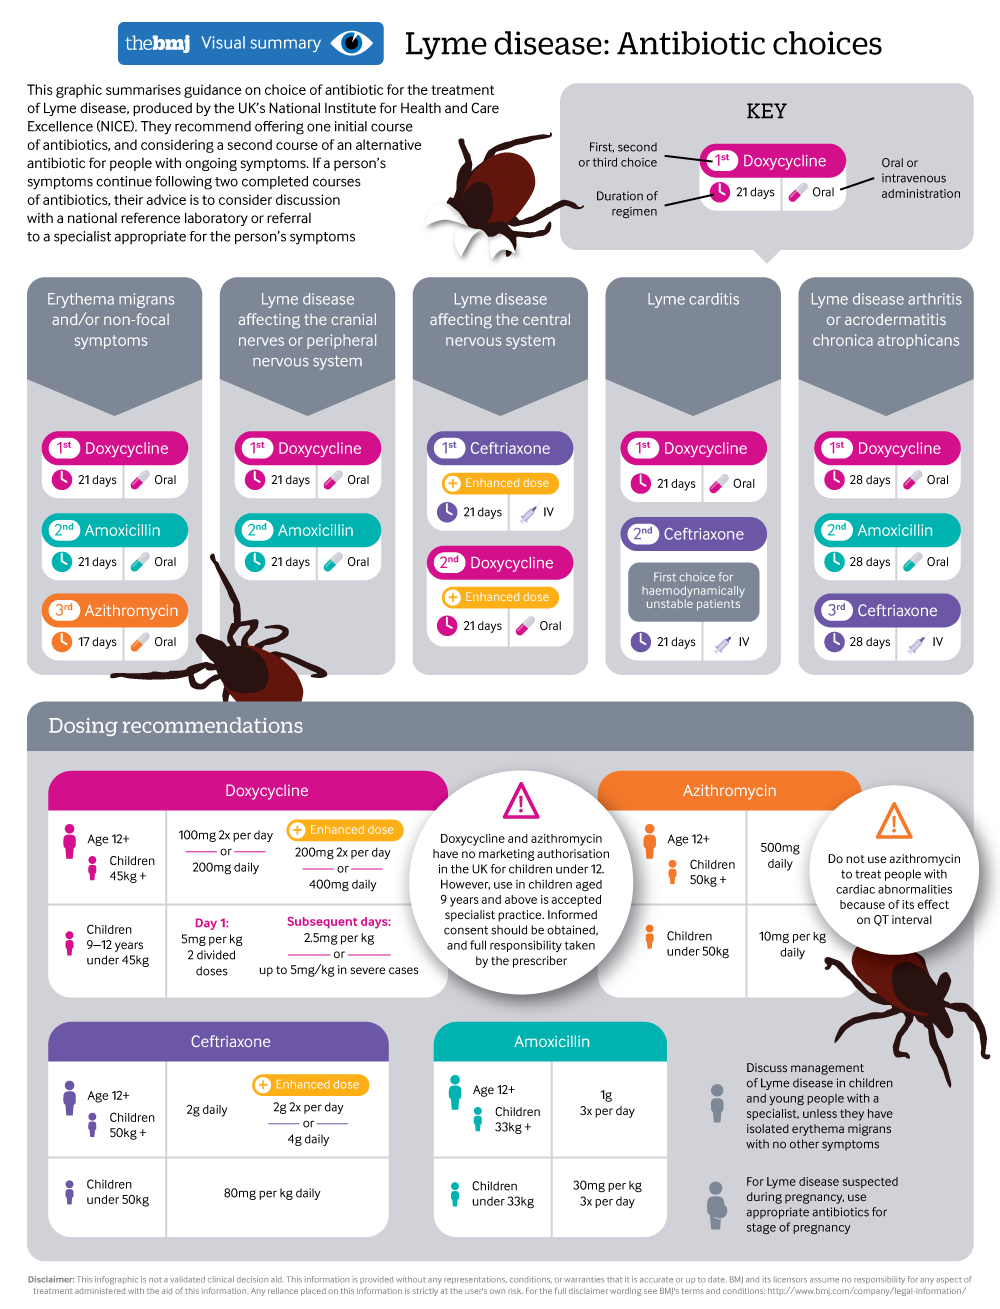 Doxycycline For Lyme â The Potential Problem with Single ...